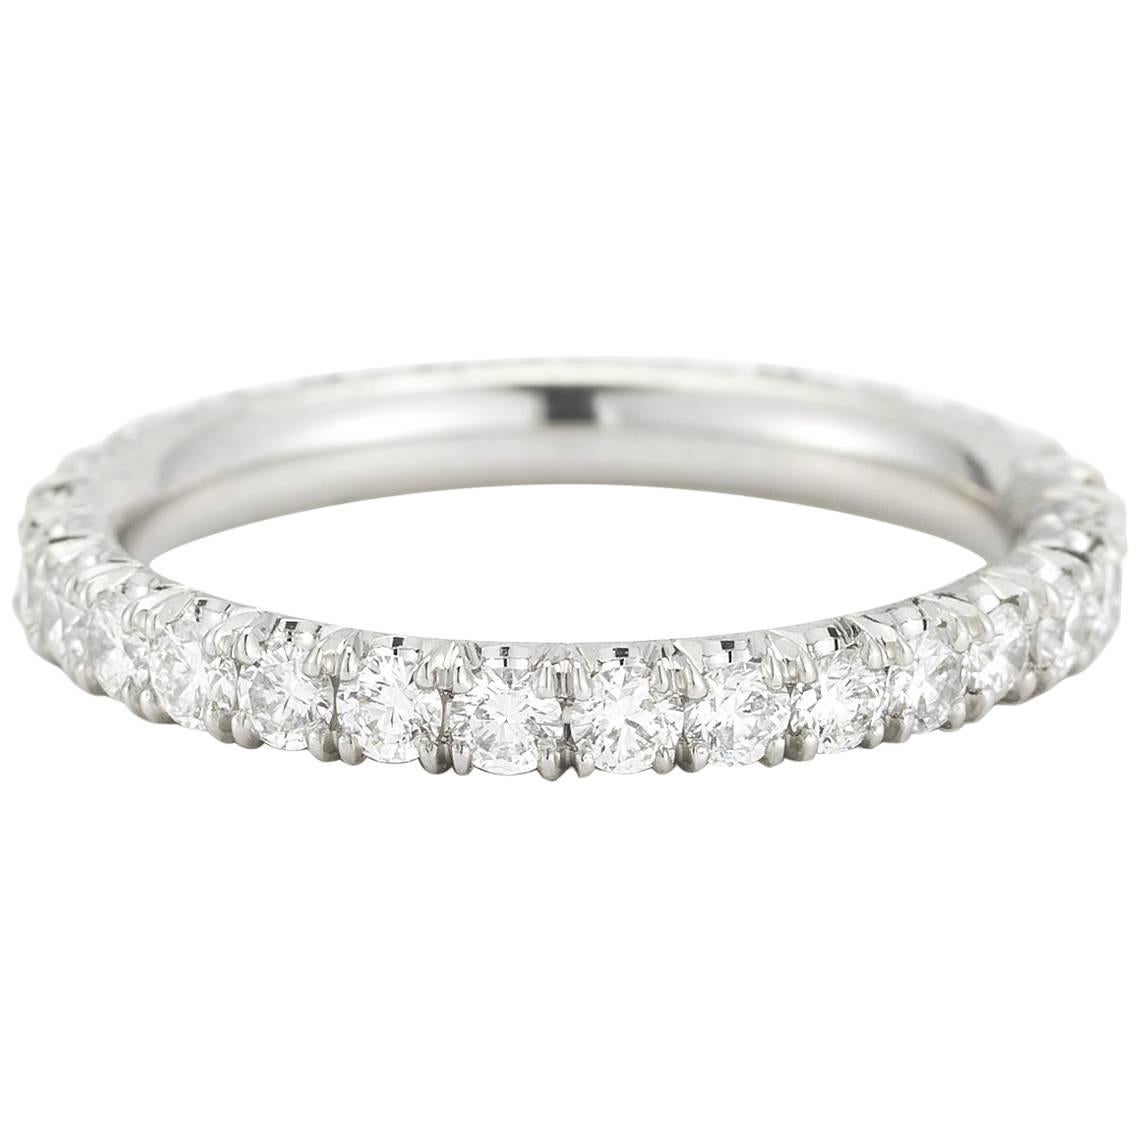 Micro Pave Eternity Band in Four Point Diamonds 1.16 Carat Diamond Weight For Sale